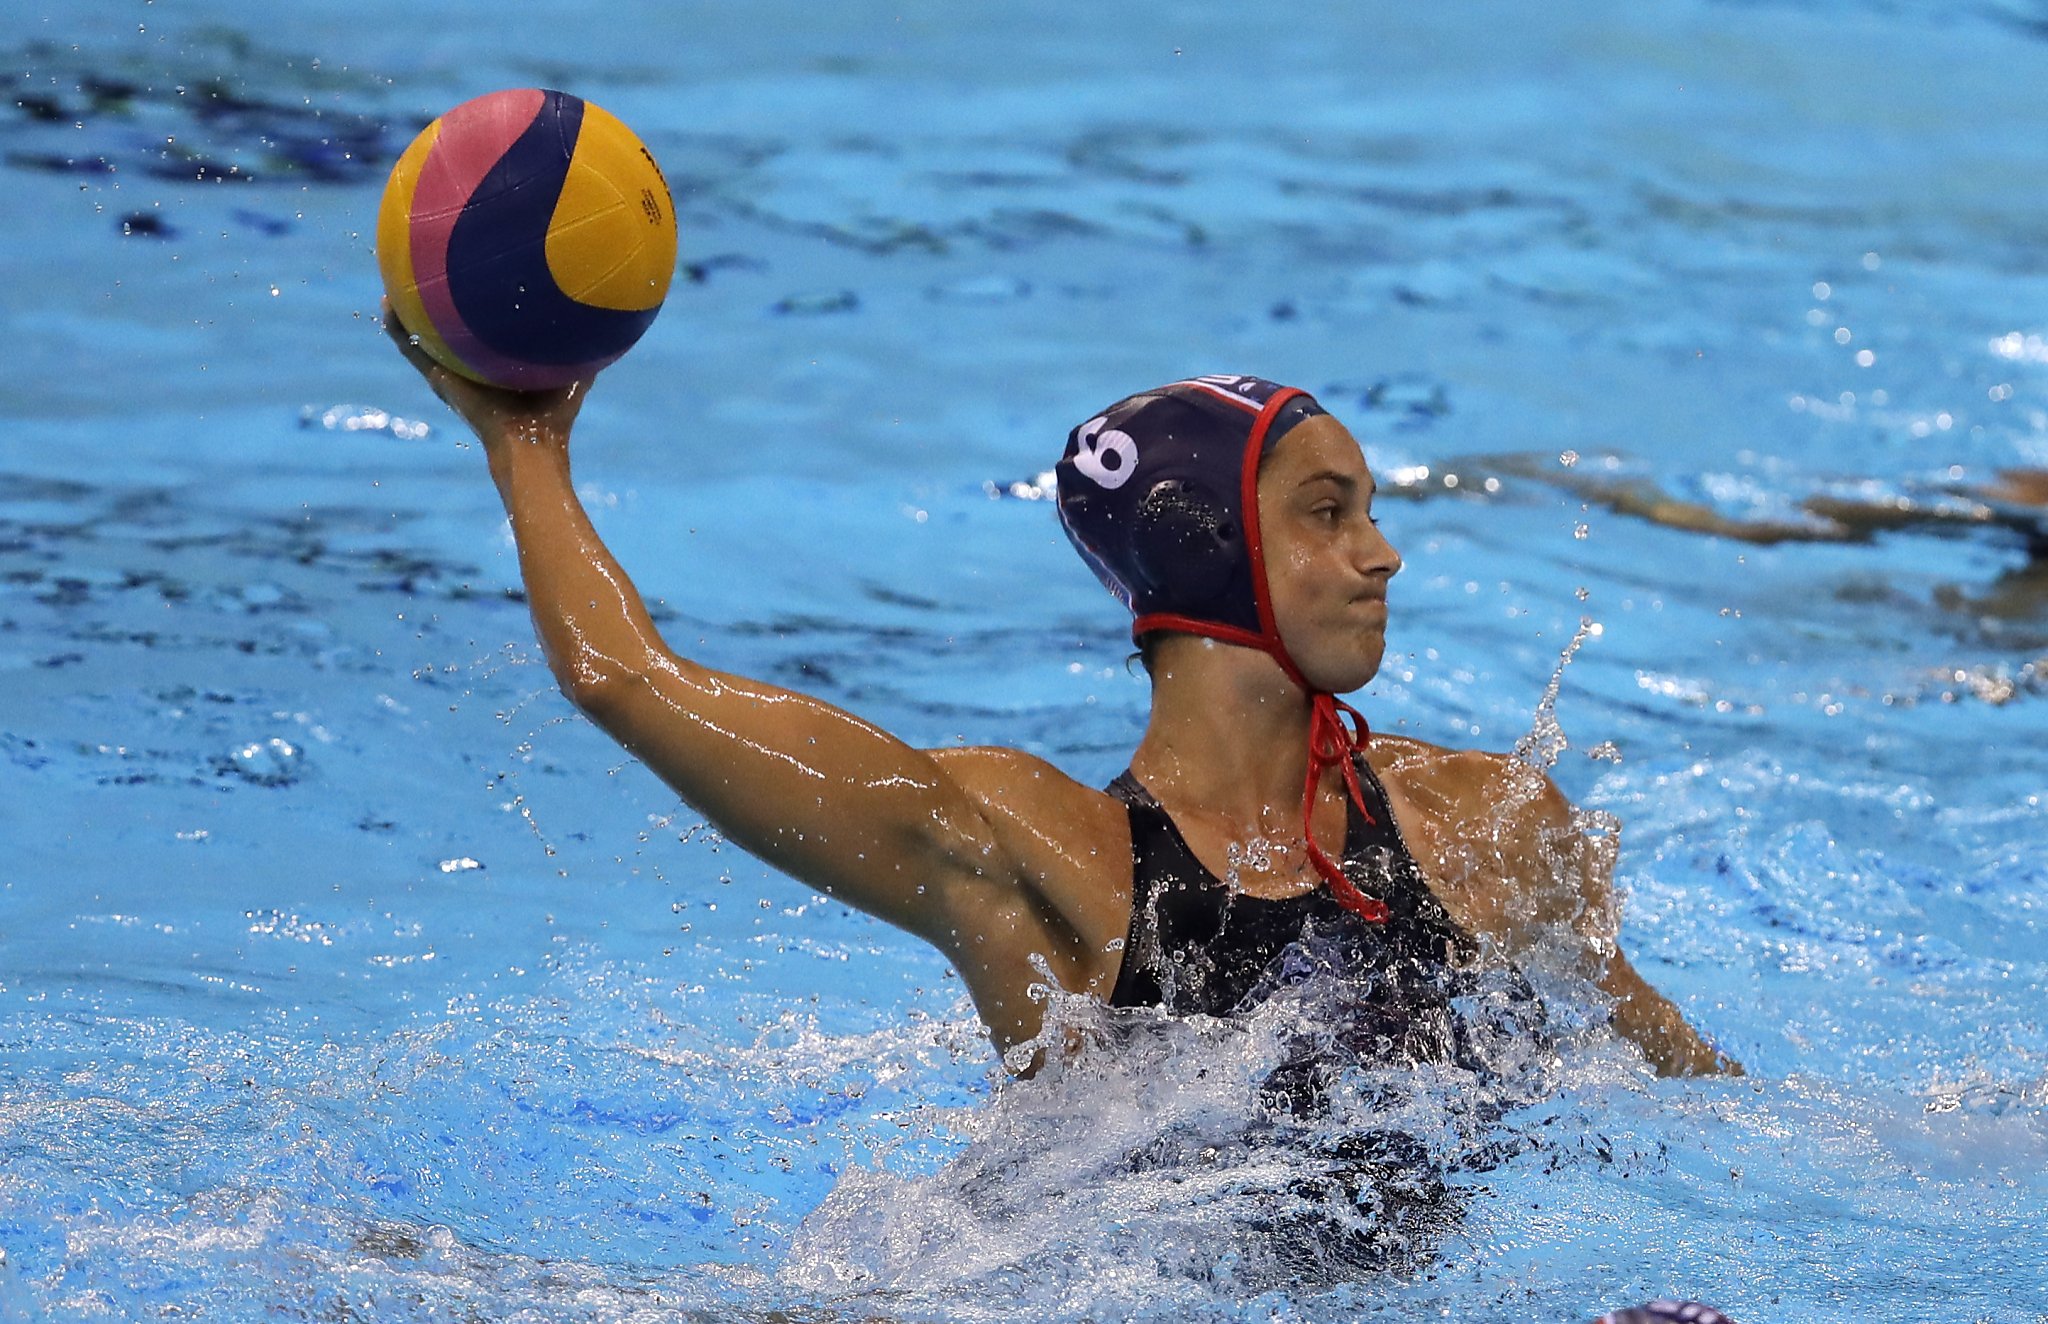 Maggie Steffens helps US reach Olympic water polo final - SFGate2048 x 1324